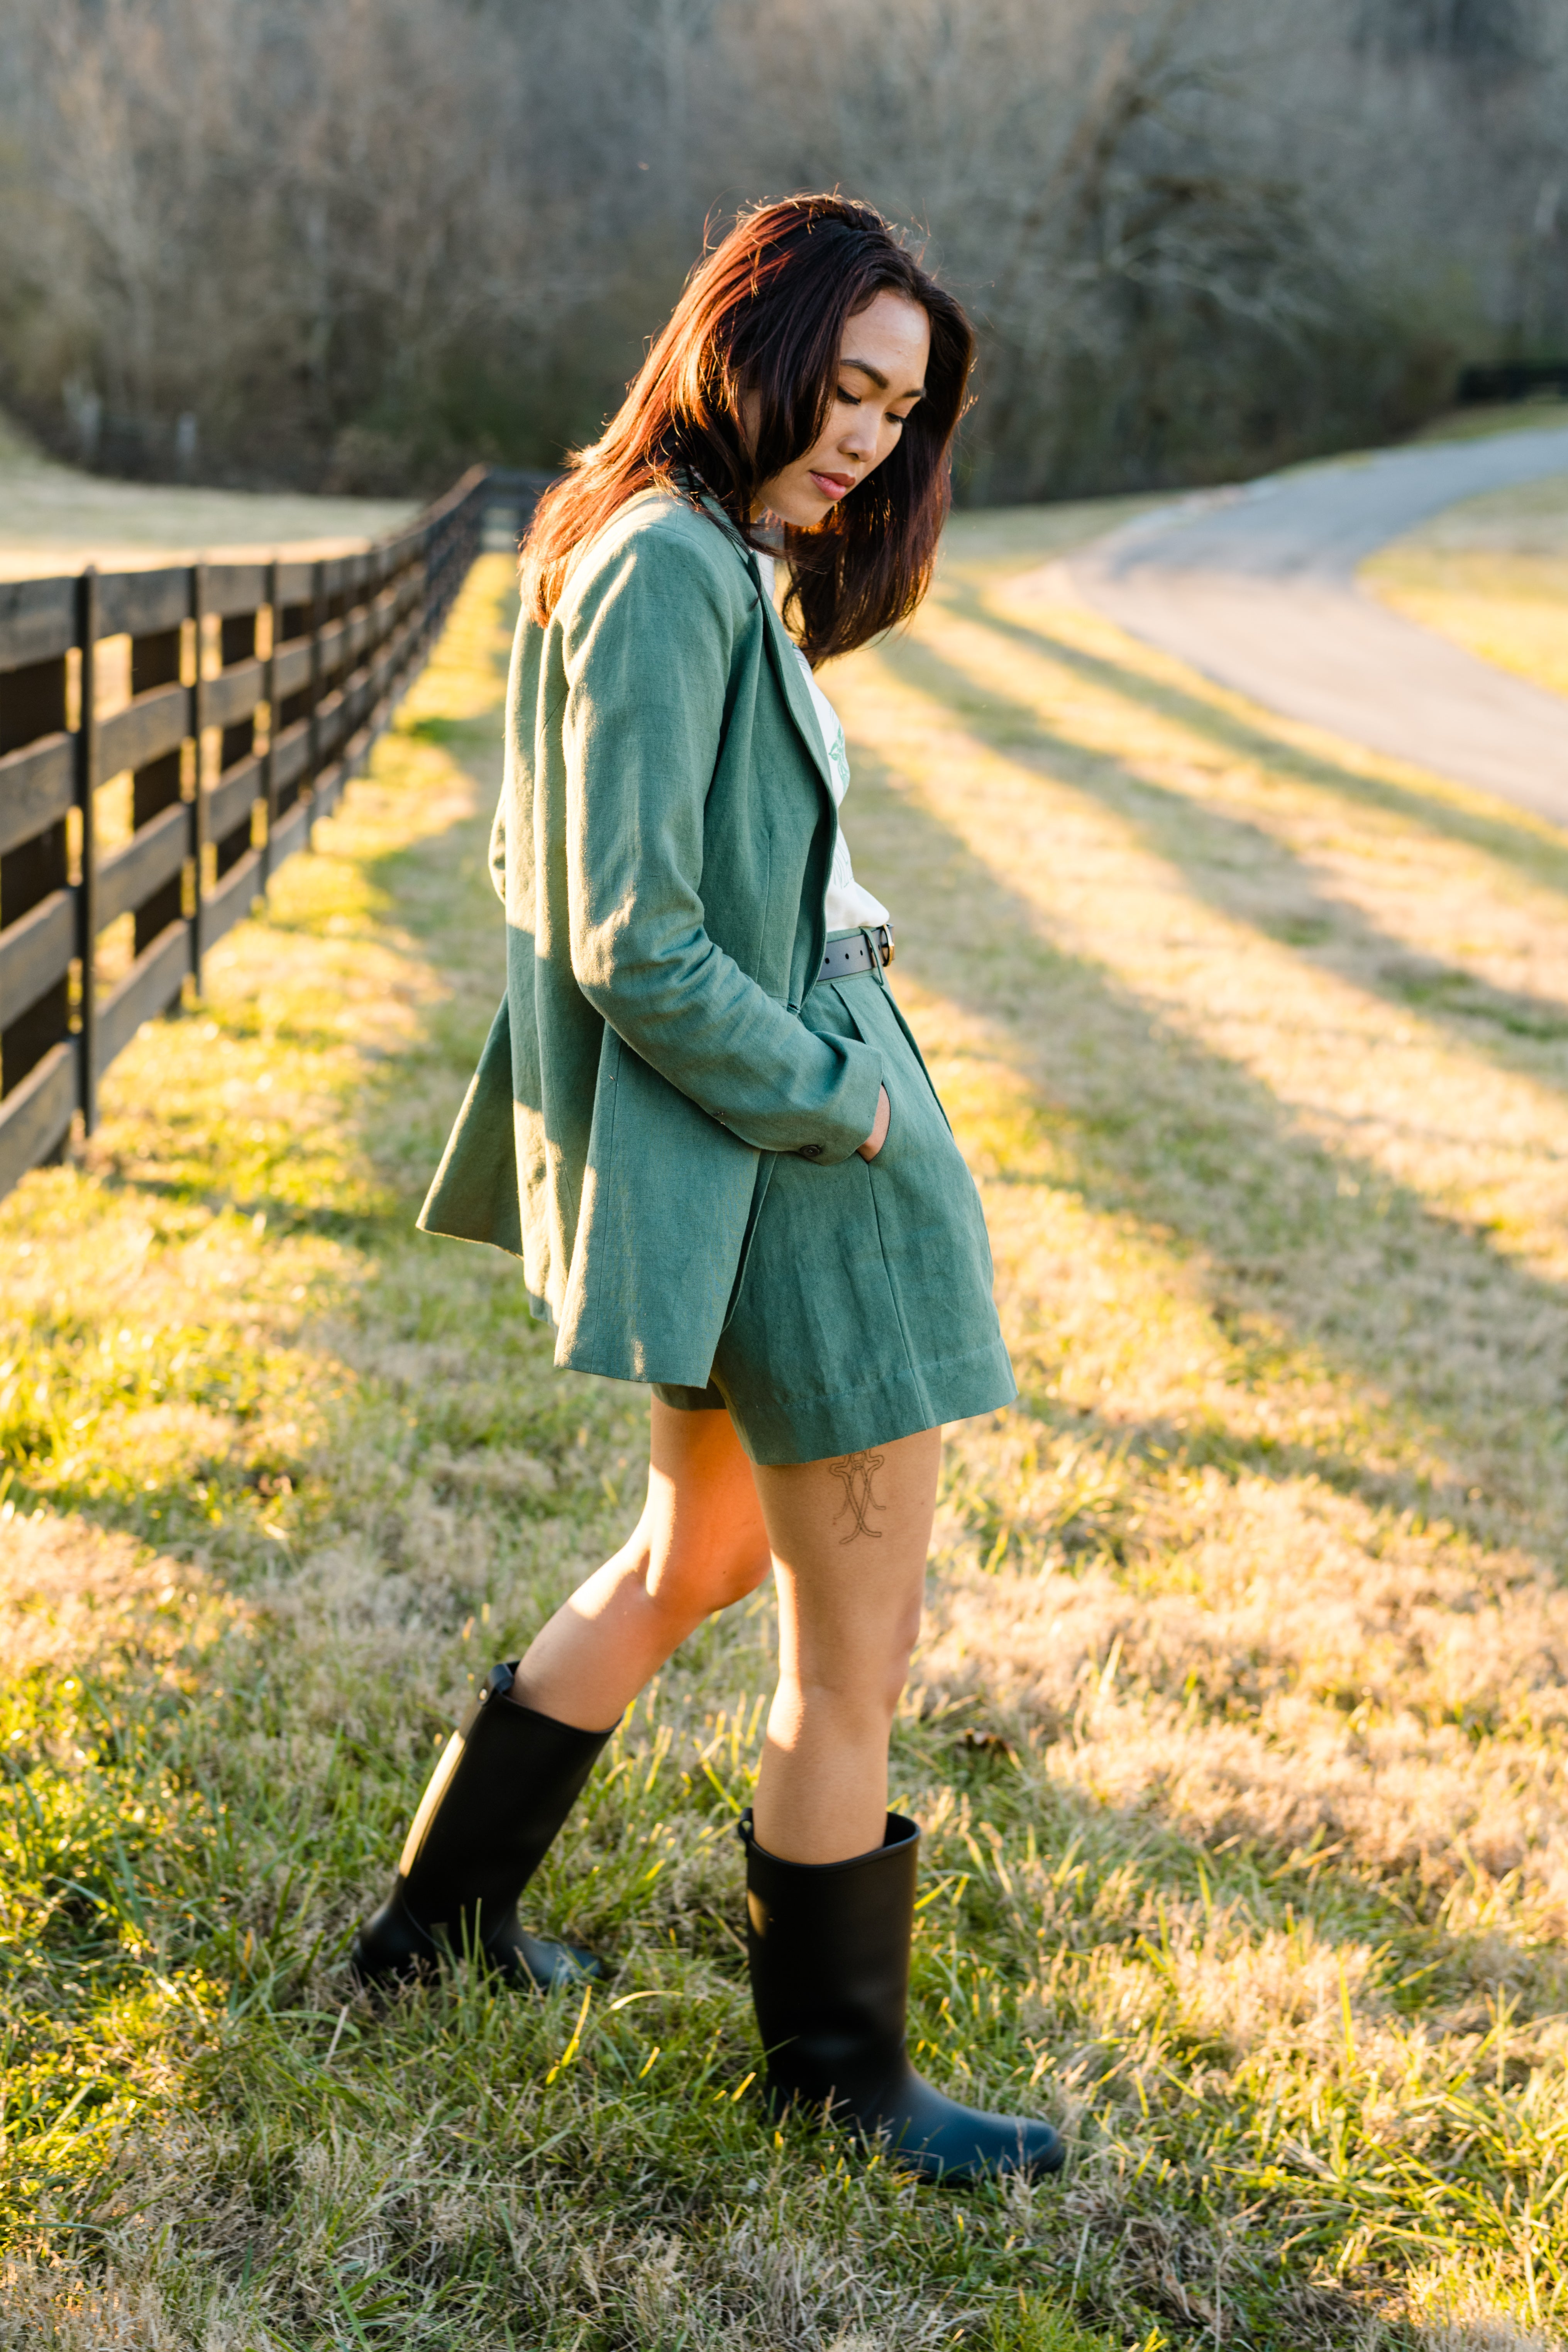 Woman in green outfit and black boots walking by a fence outdoors.